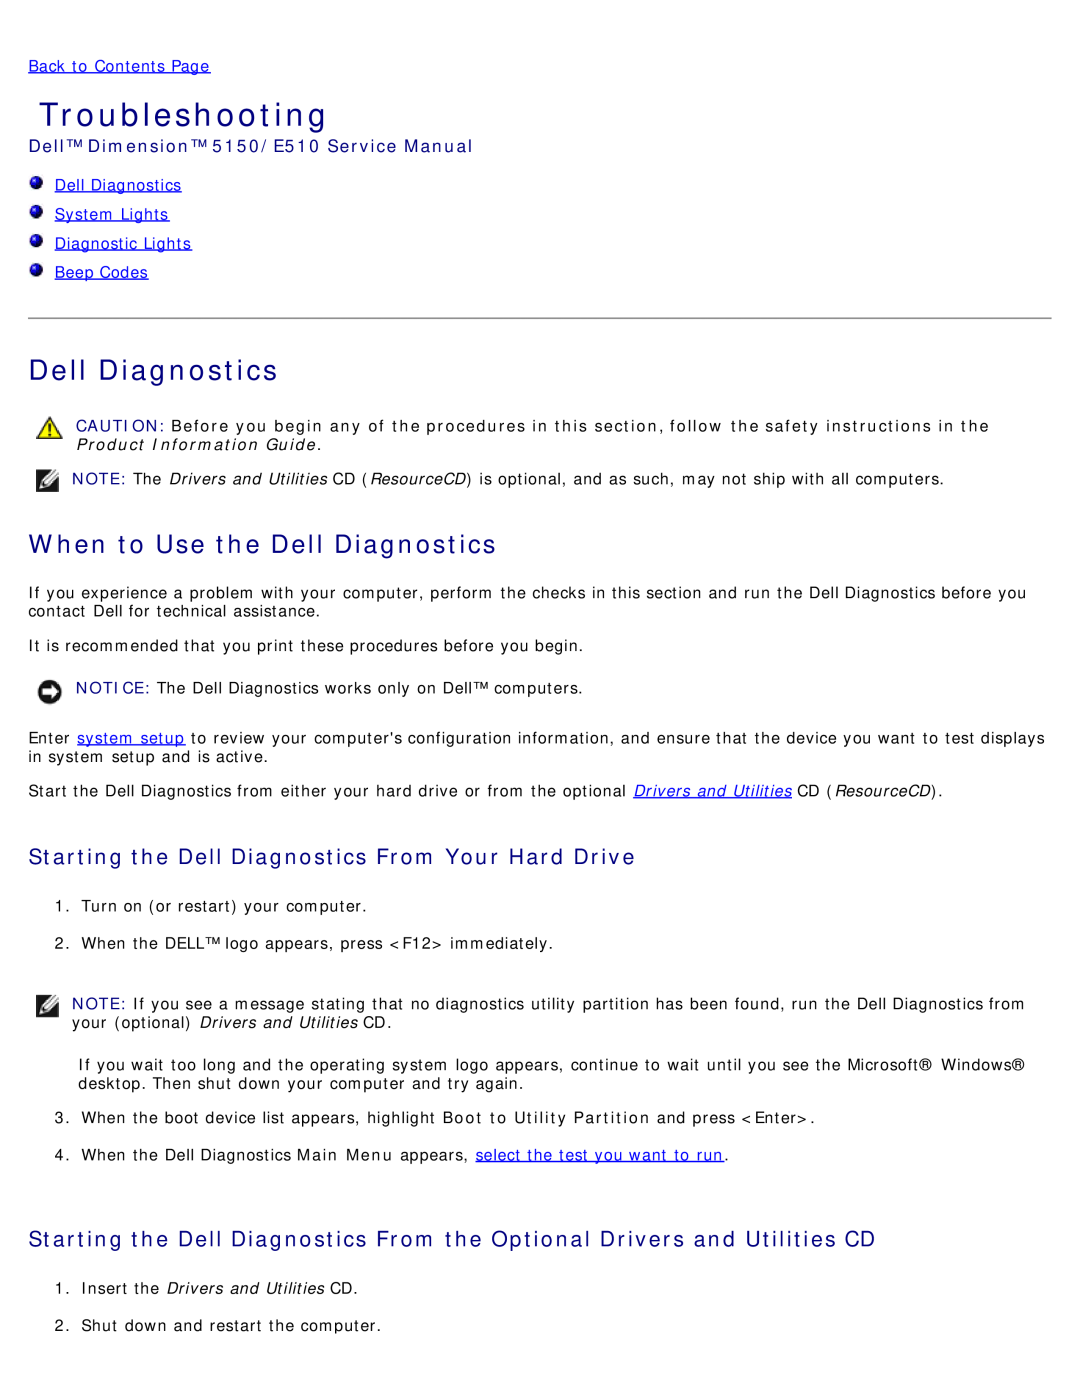 Dell DCSM manual Troubleshooting, When to Use the Dell Diagnostics, Starting the Dell Diagnostics From Your Hard Drive 